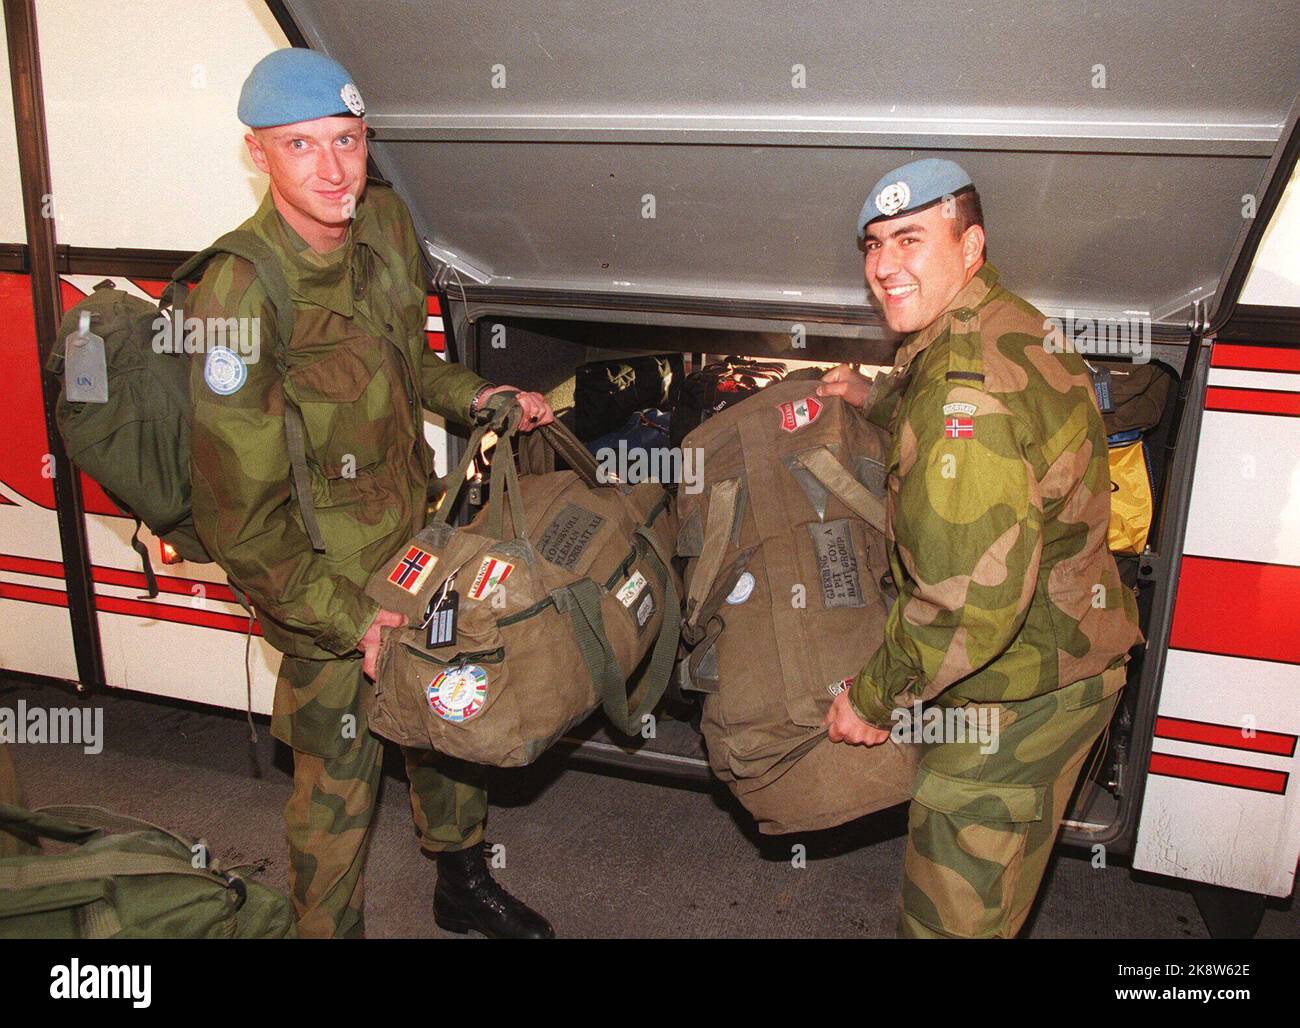 The soldiers Regen Bringsli (TV) from Fauske and Pål Sergei Gjerding from Oslo were among the first Norwegian UN soldiers to come to Gardermoen on Wednesday, when the UN Force in Southern Lebanon began returning home after 20 years of efforts. Photo: Terje Bendiksby / NTB Stock Photo